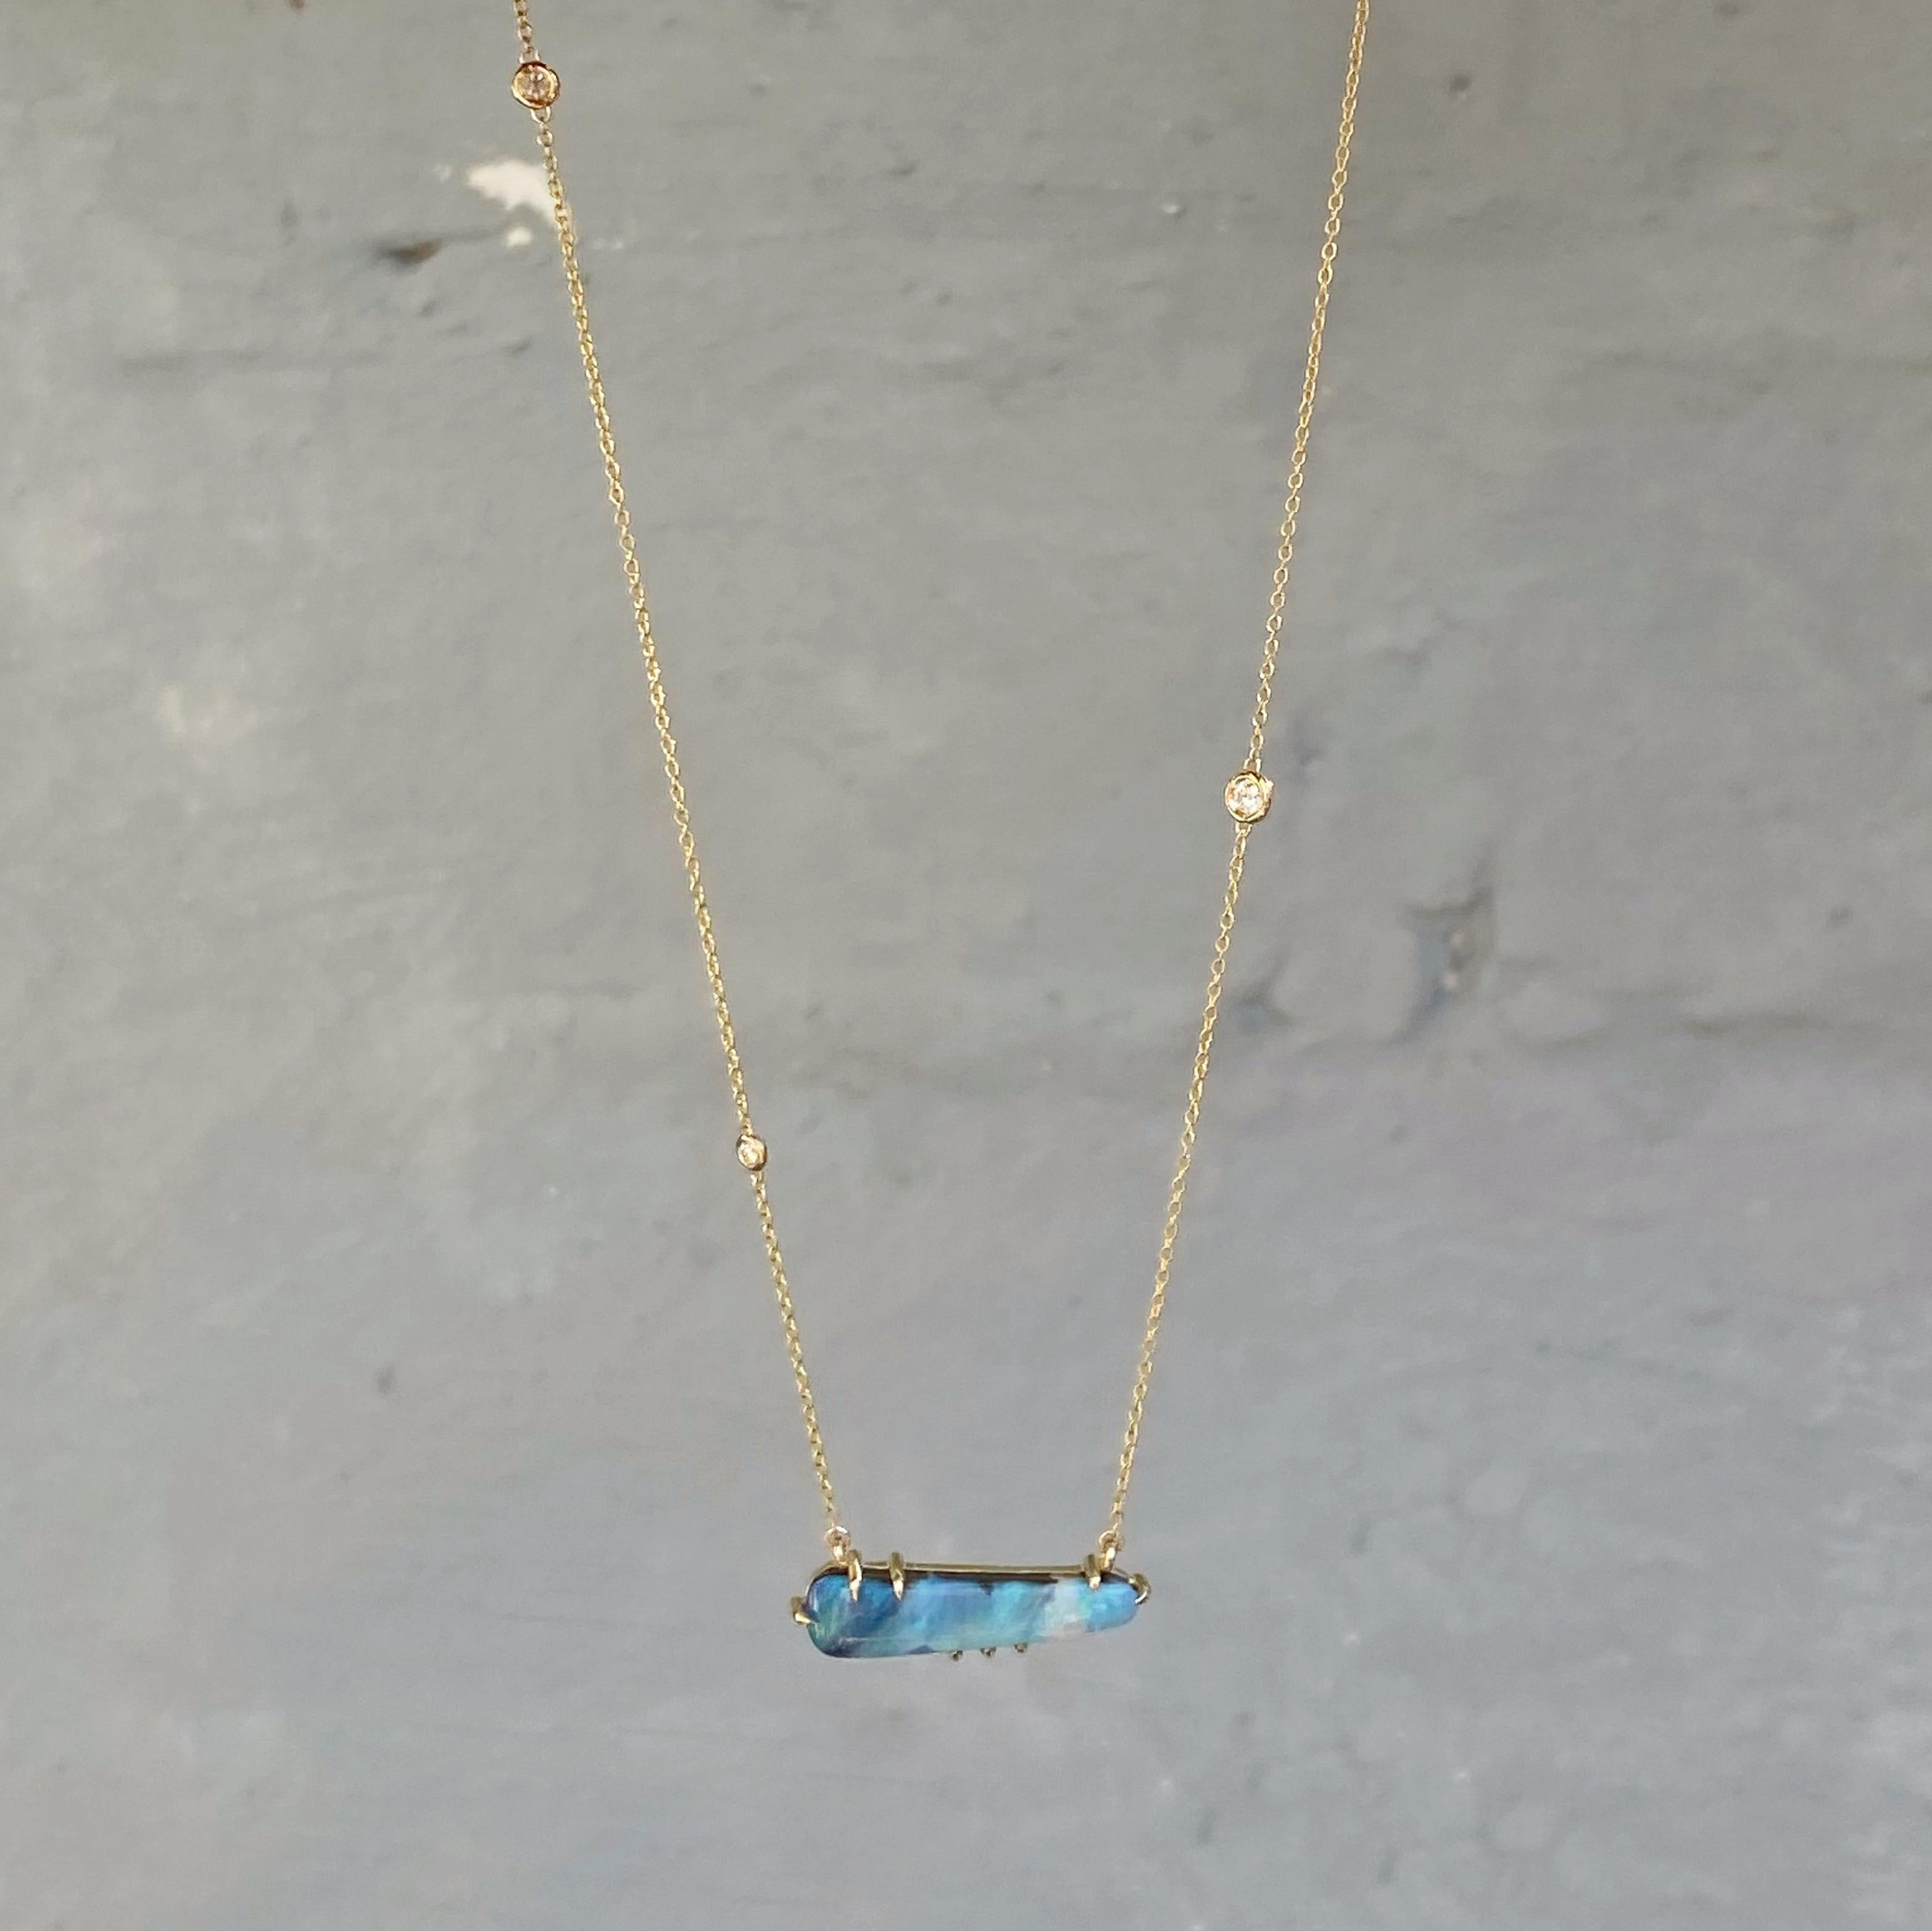 Winter Flurry Boulder Opal Diamond Station Necklace in 14k Gold by NIXIN Jewelry In New Condition For Sale In Los Angeles, CA